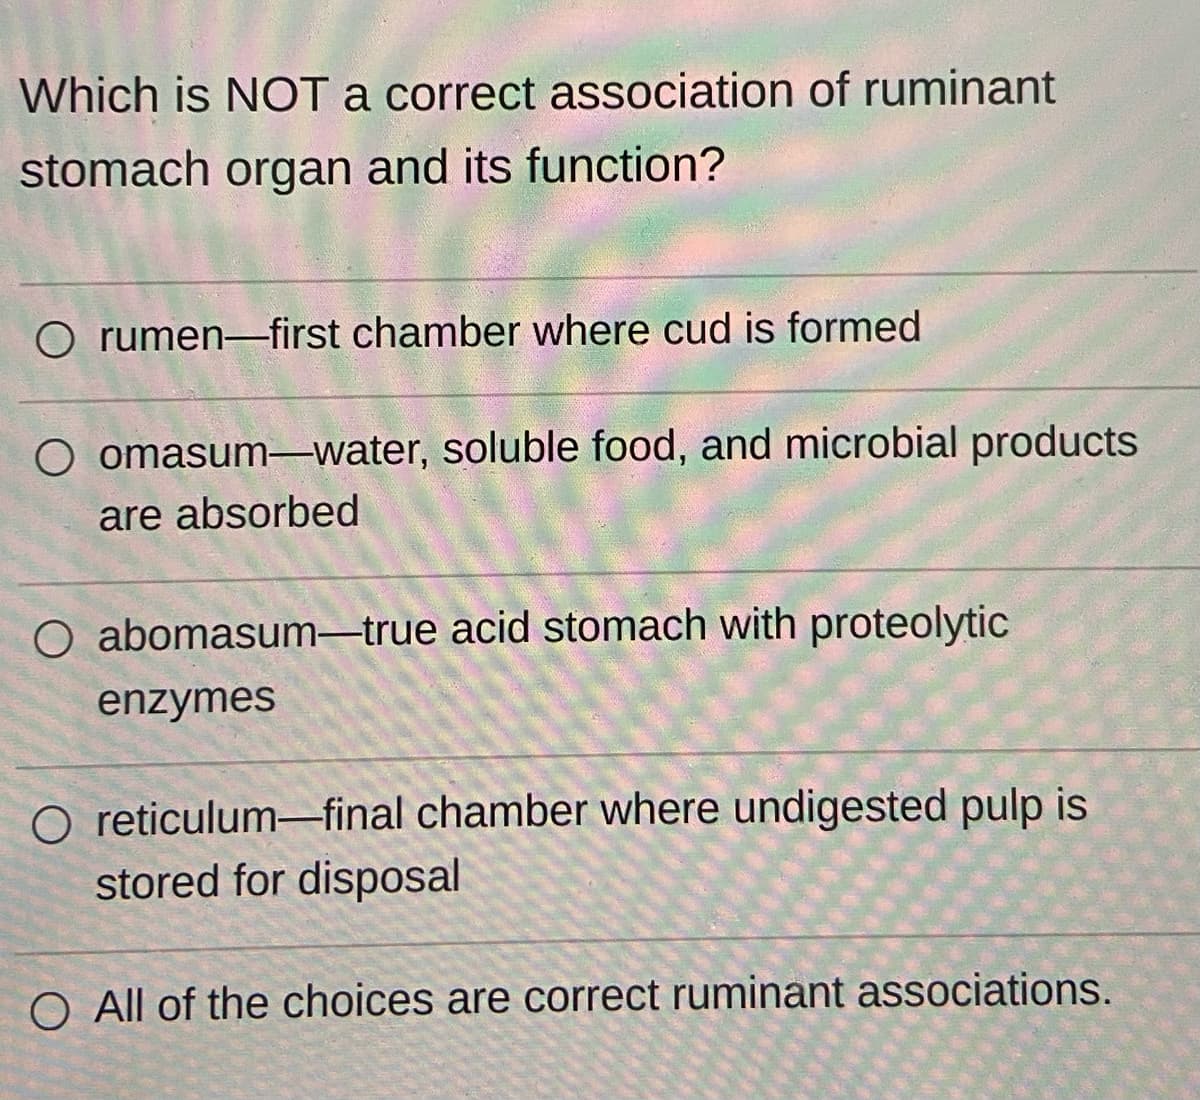 Which is NOT a correct association of ruminant
stomach organ and its function?
O rumen-first chamber where cud is formed
O omasum-water, soluble food, and microbial products
are absorbed
O abomasum-true acid stomach with proteolytic
enzymes
O reticulum-final chamber where undigested pulp is
stored for disposal
O All of the choices are correct ruminant associations.
